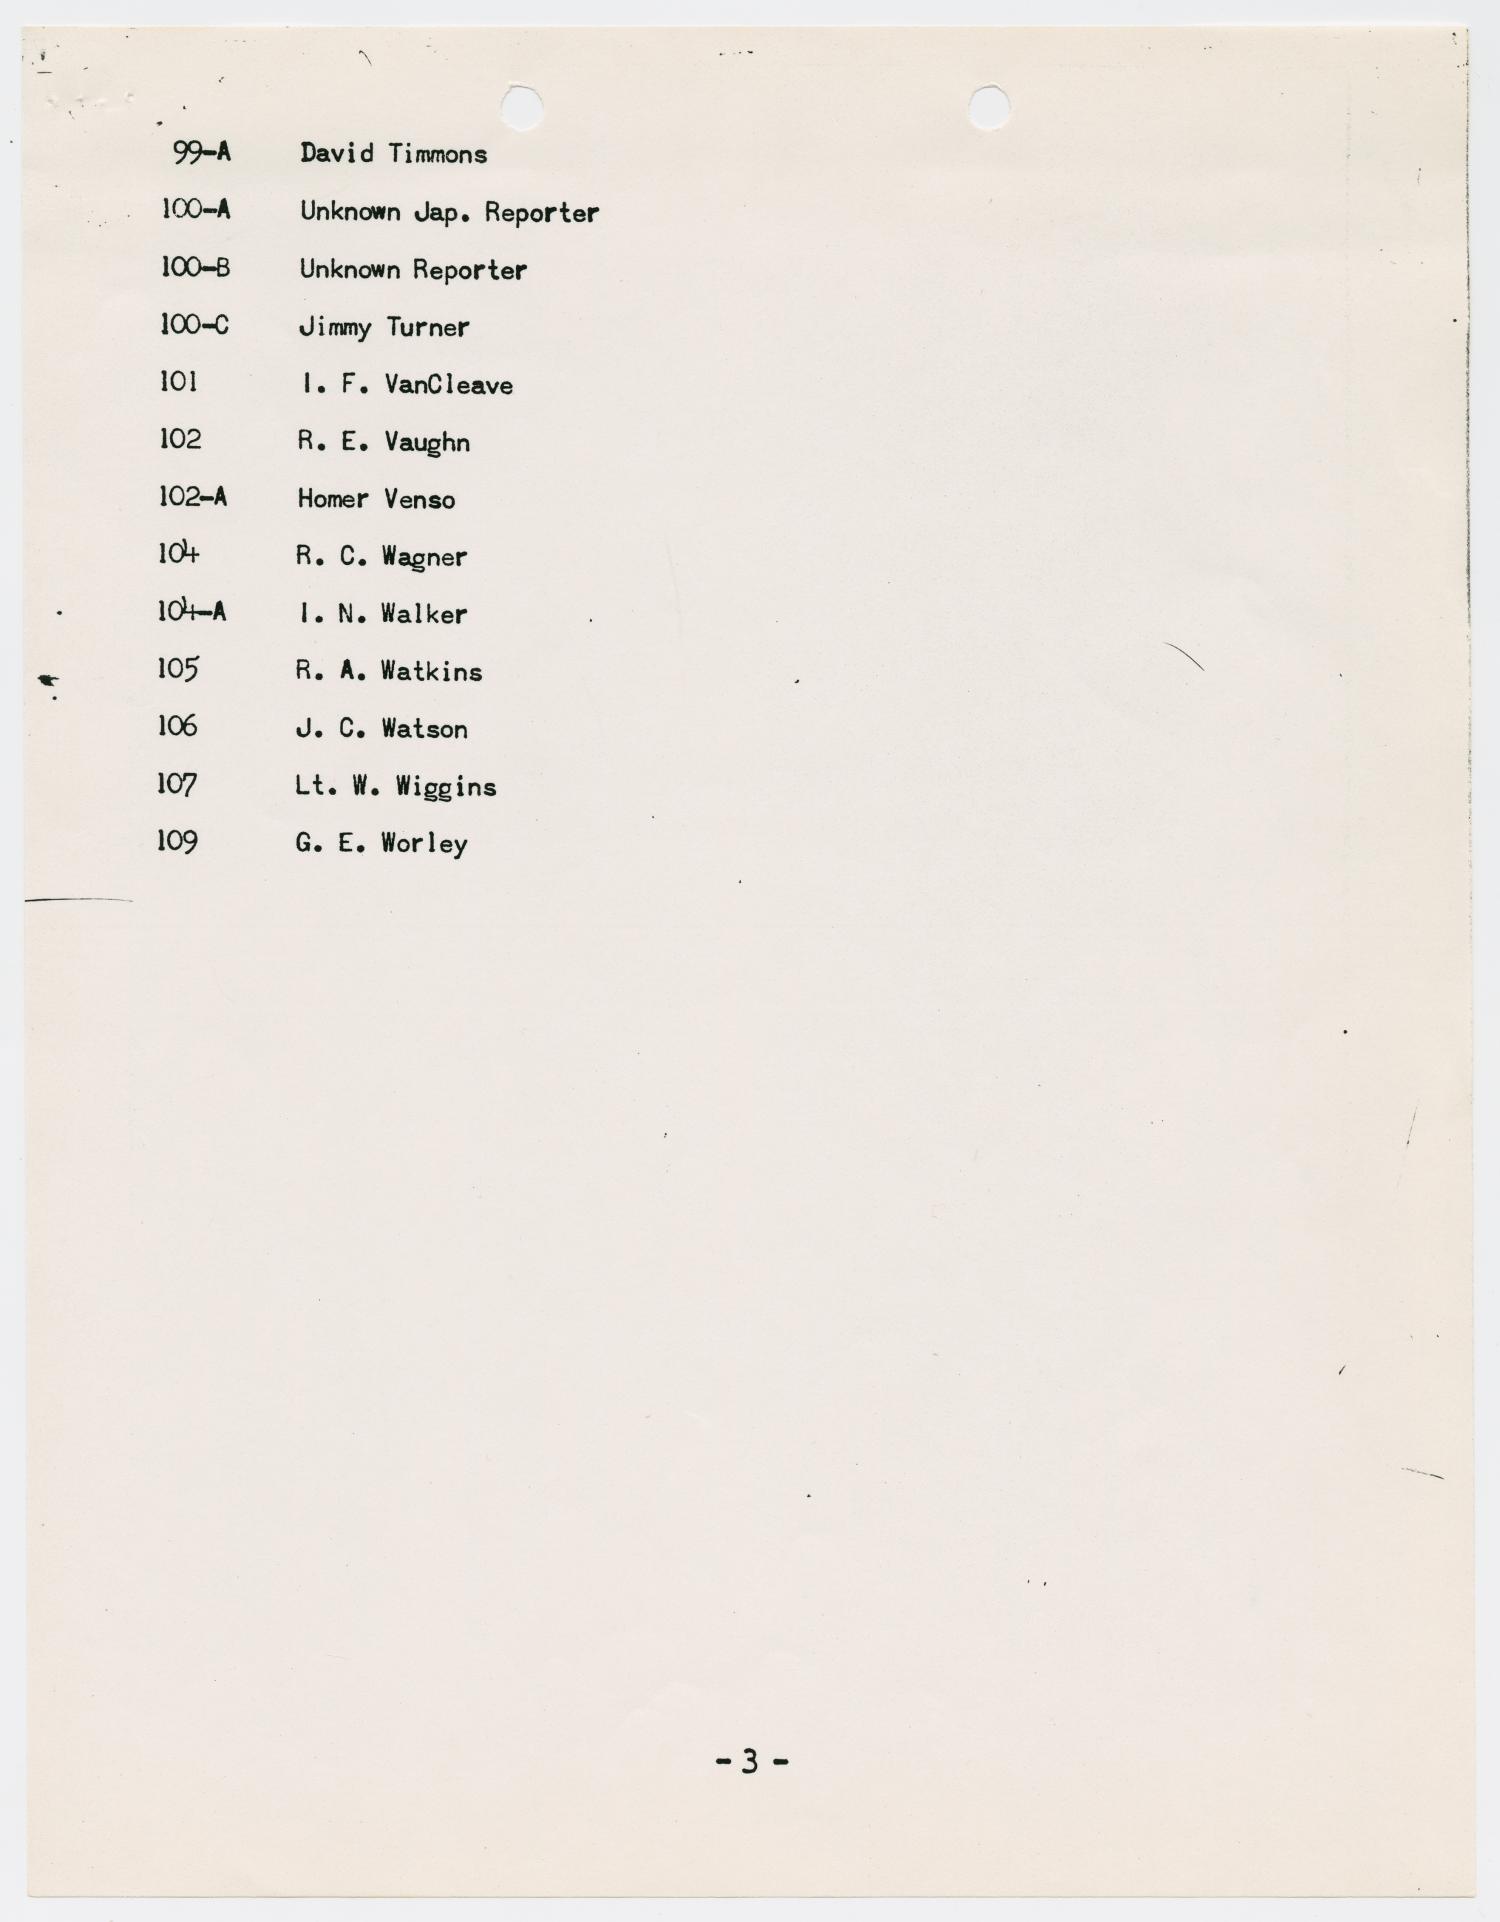 Page_3_of_list_of_personnel_in_basement_